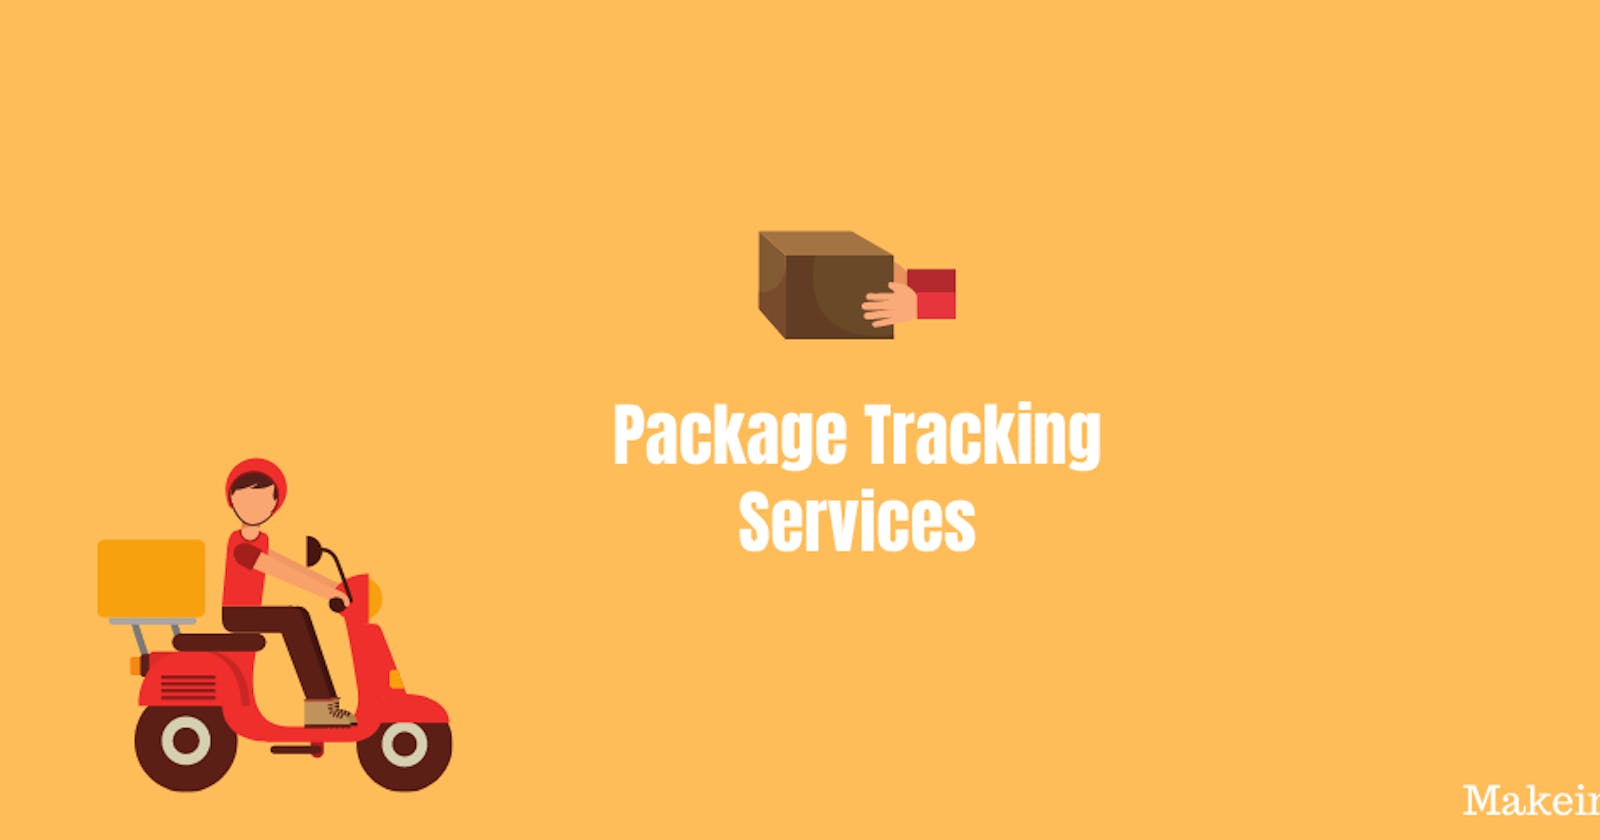 Top package tracking services for eCommerce companies